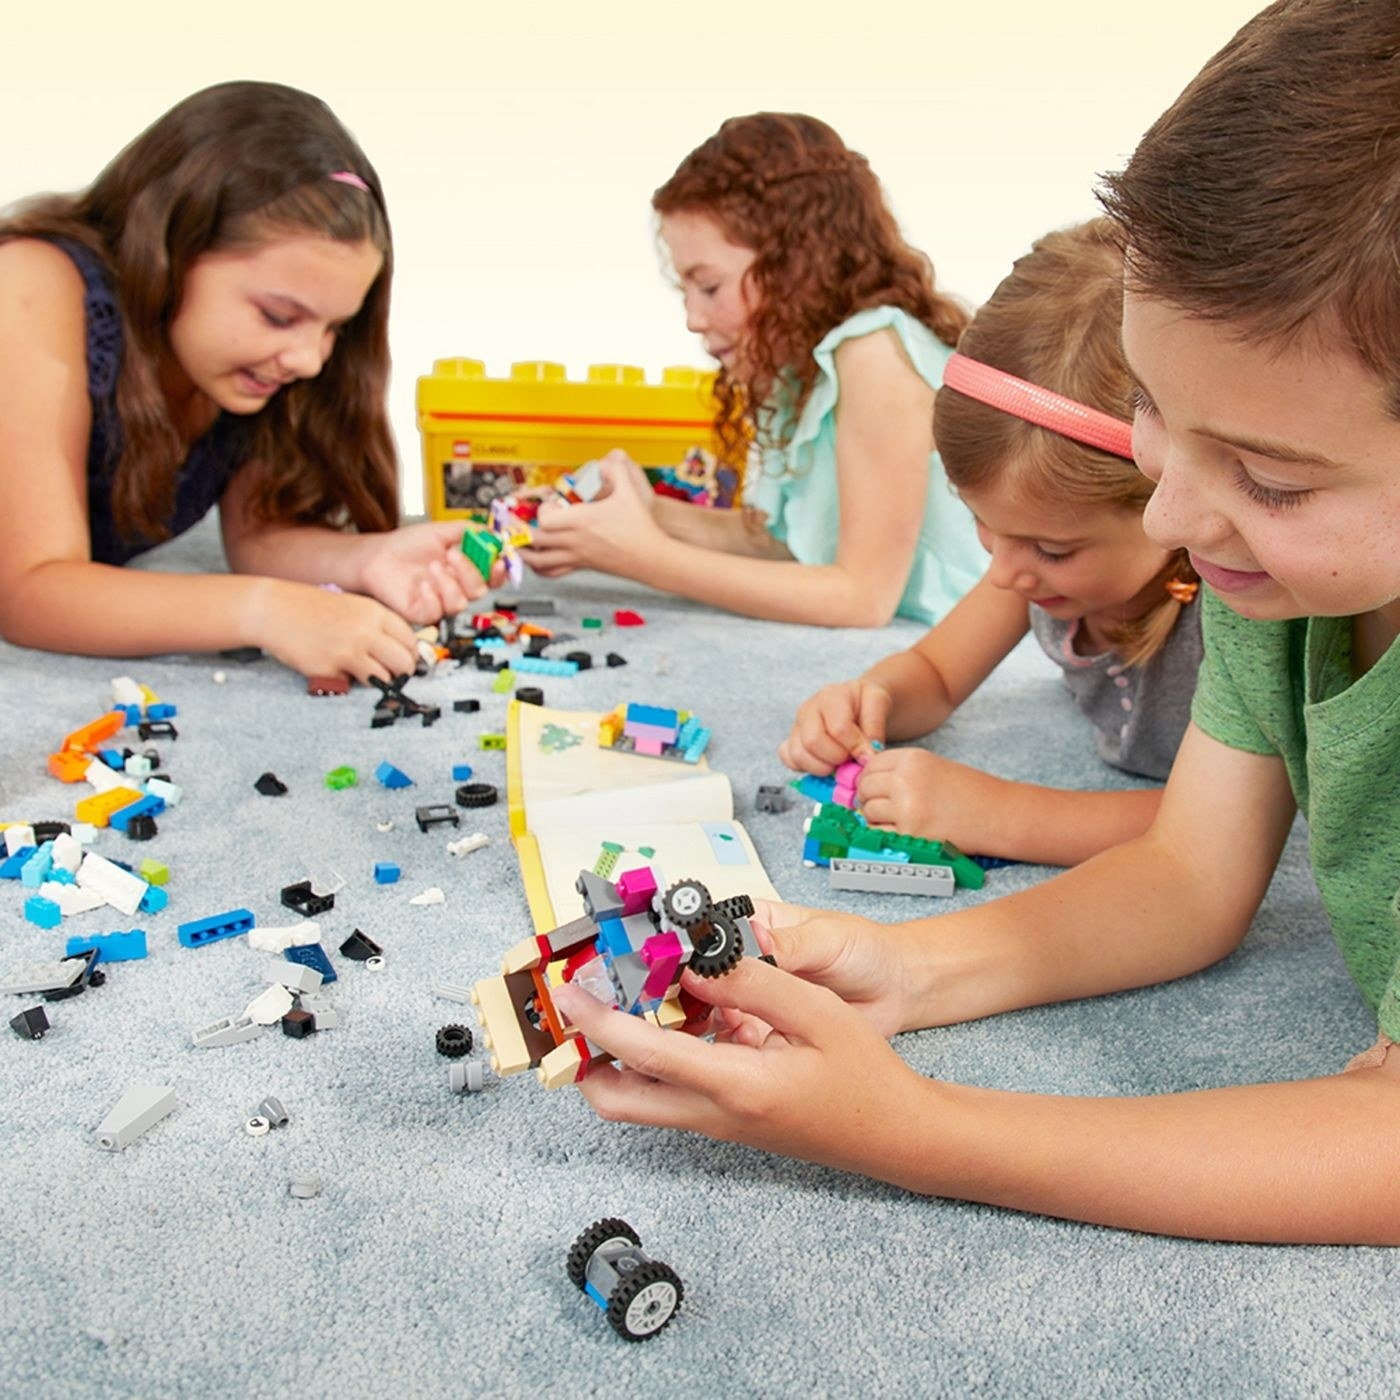 Kids playing with legos